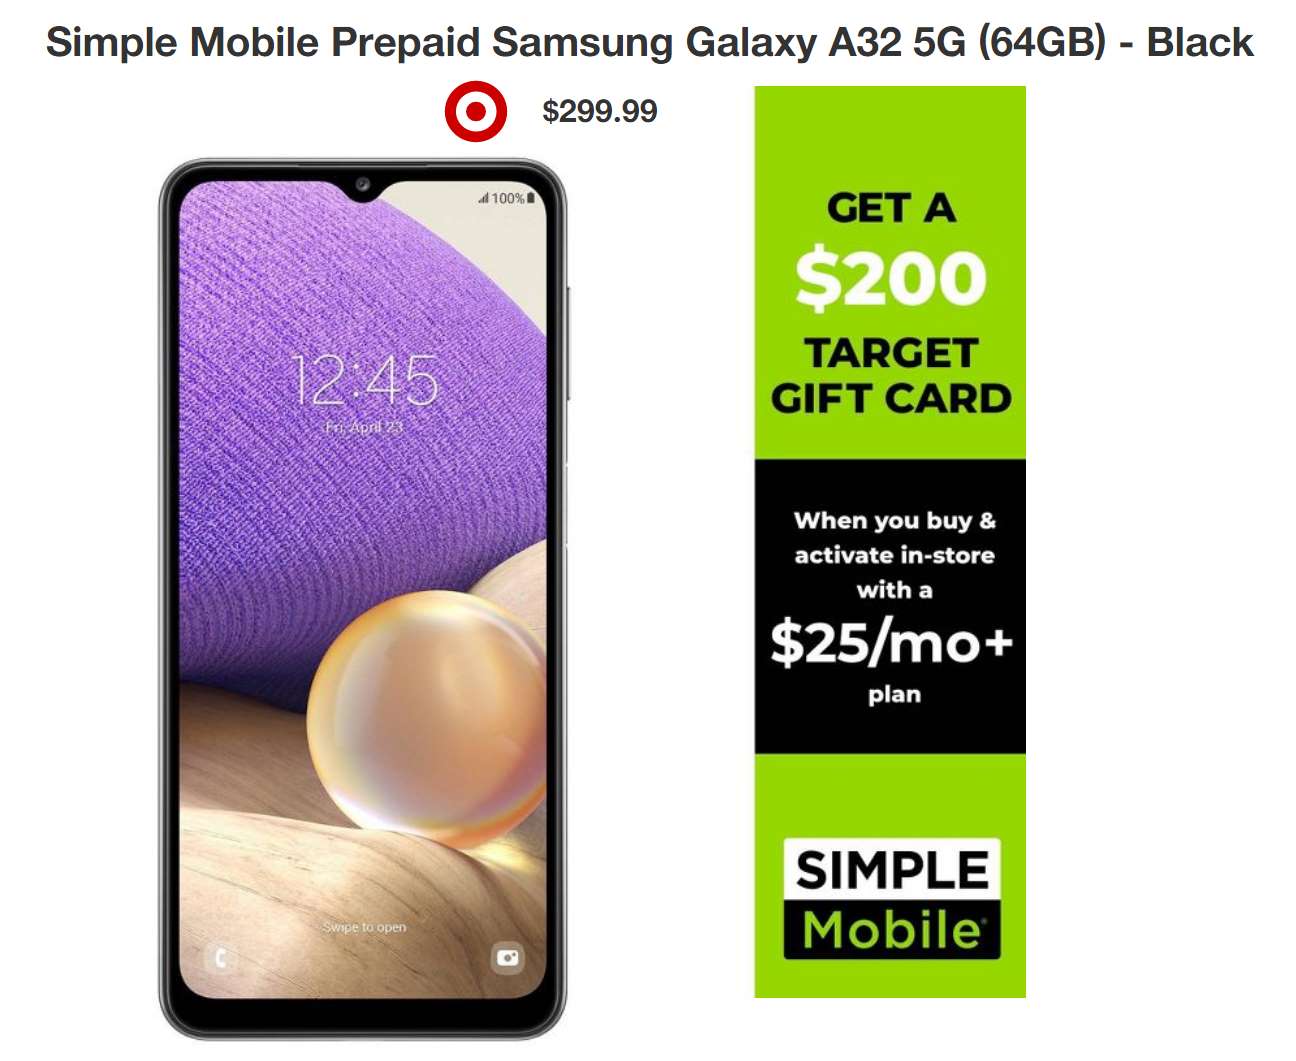 Target Has Gift Card Offers With Phone Purchases